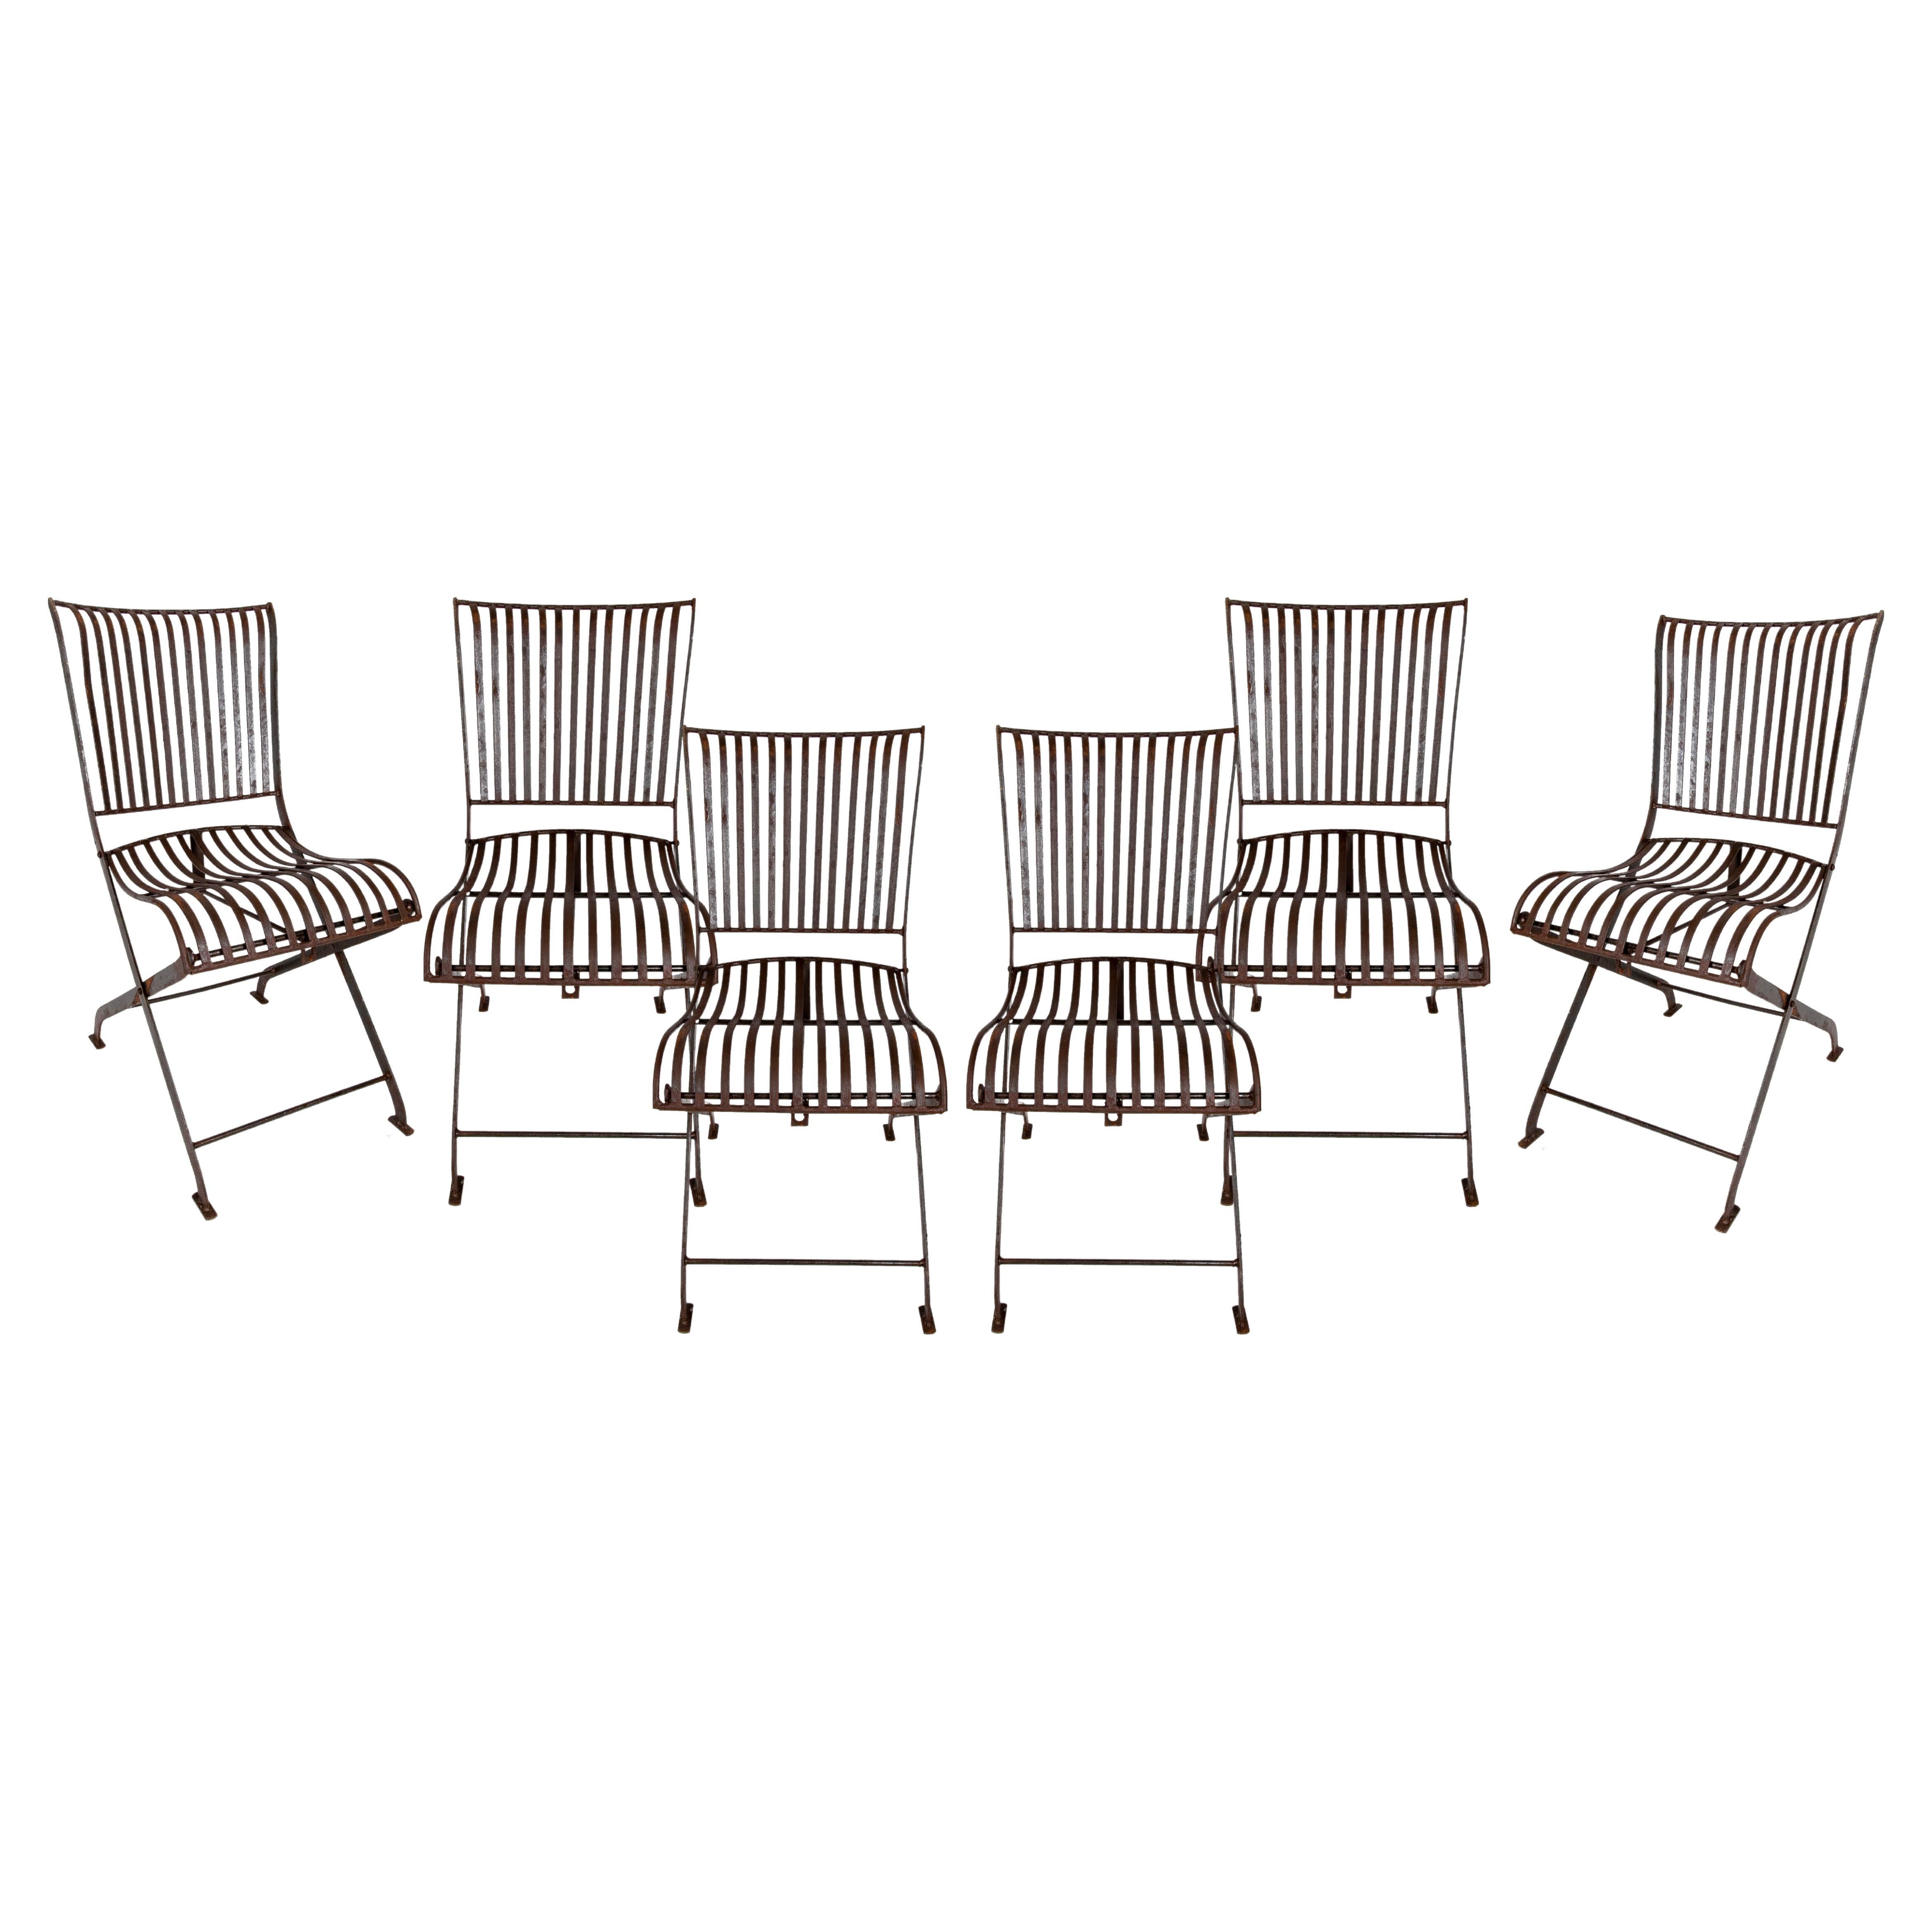 Set of Six Foldable Iron Garden Chairs